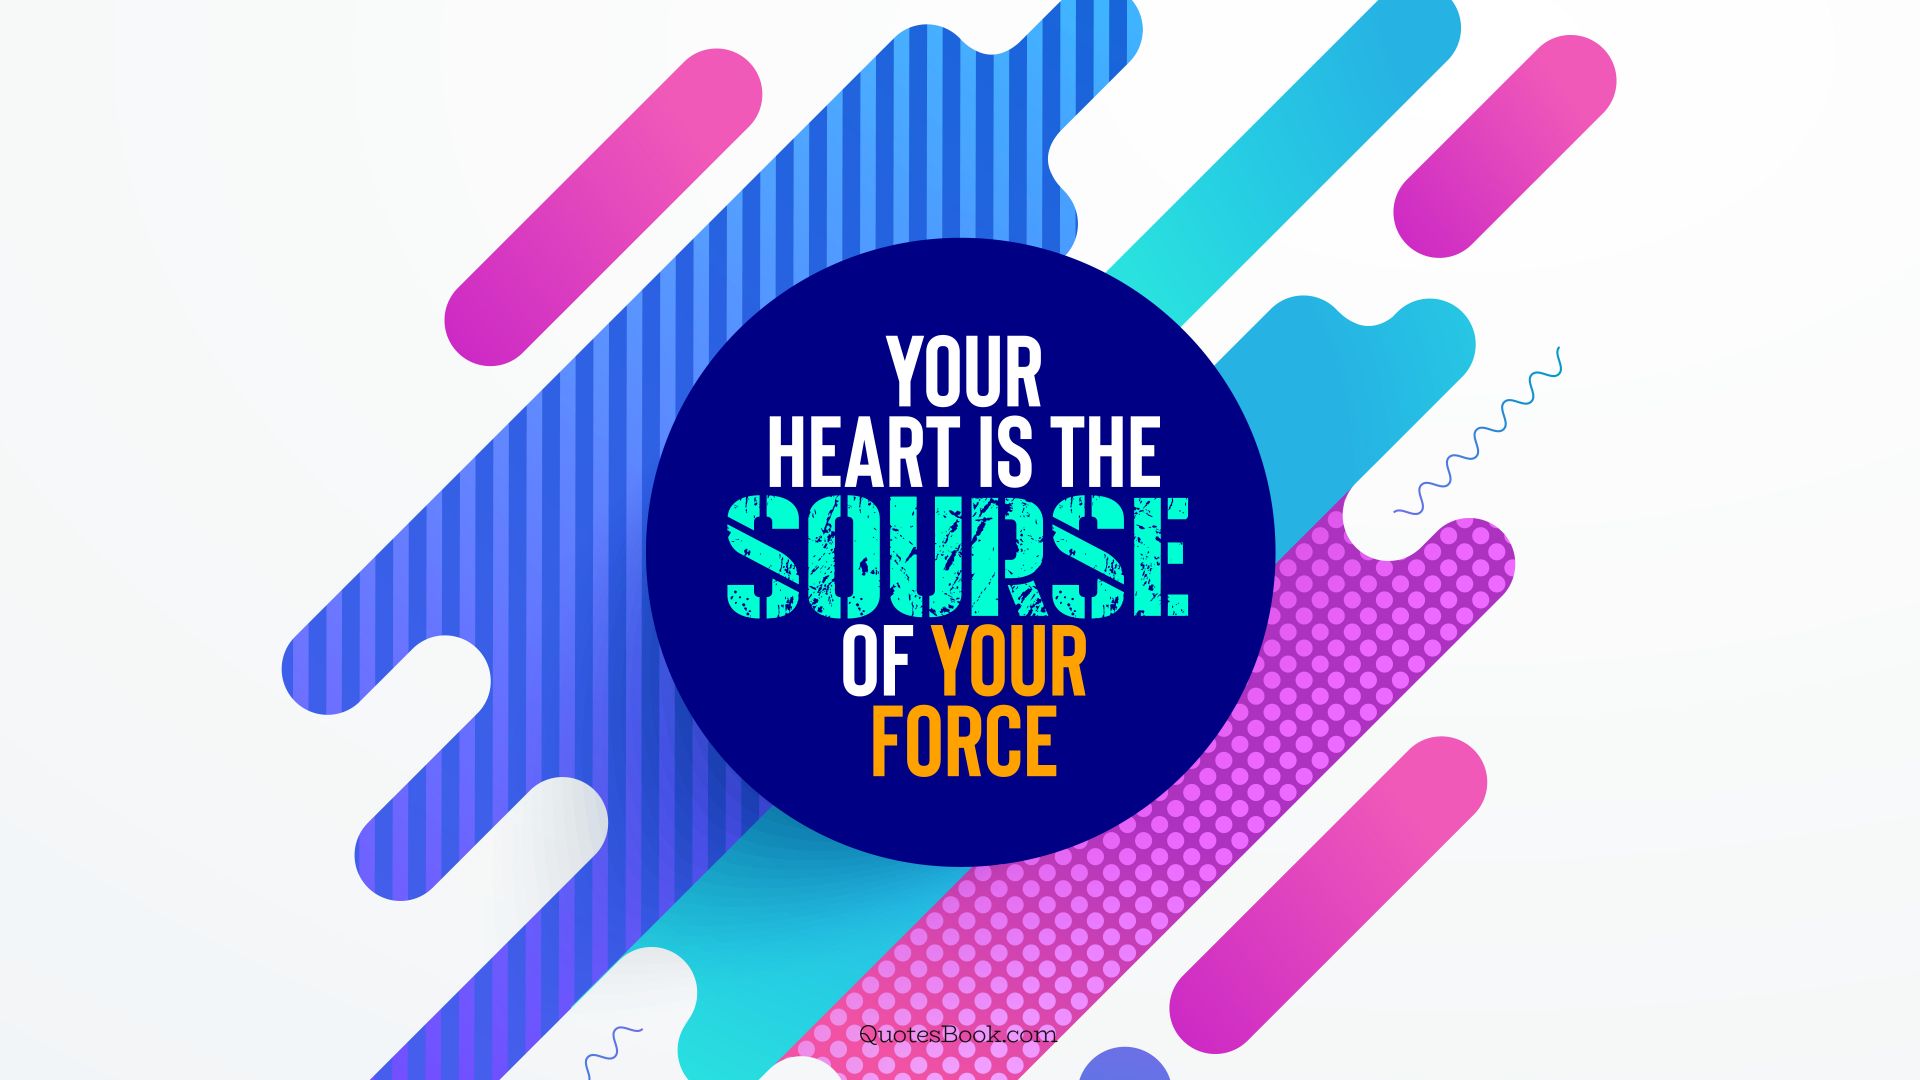 Your heart is the source of your force. - Quote by QuotesBook